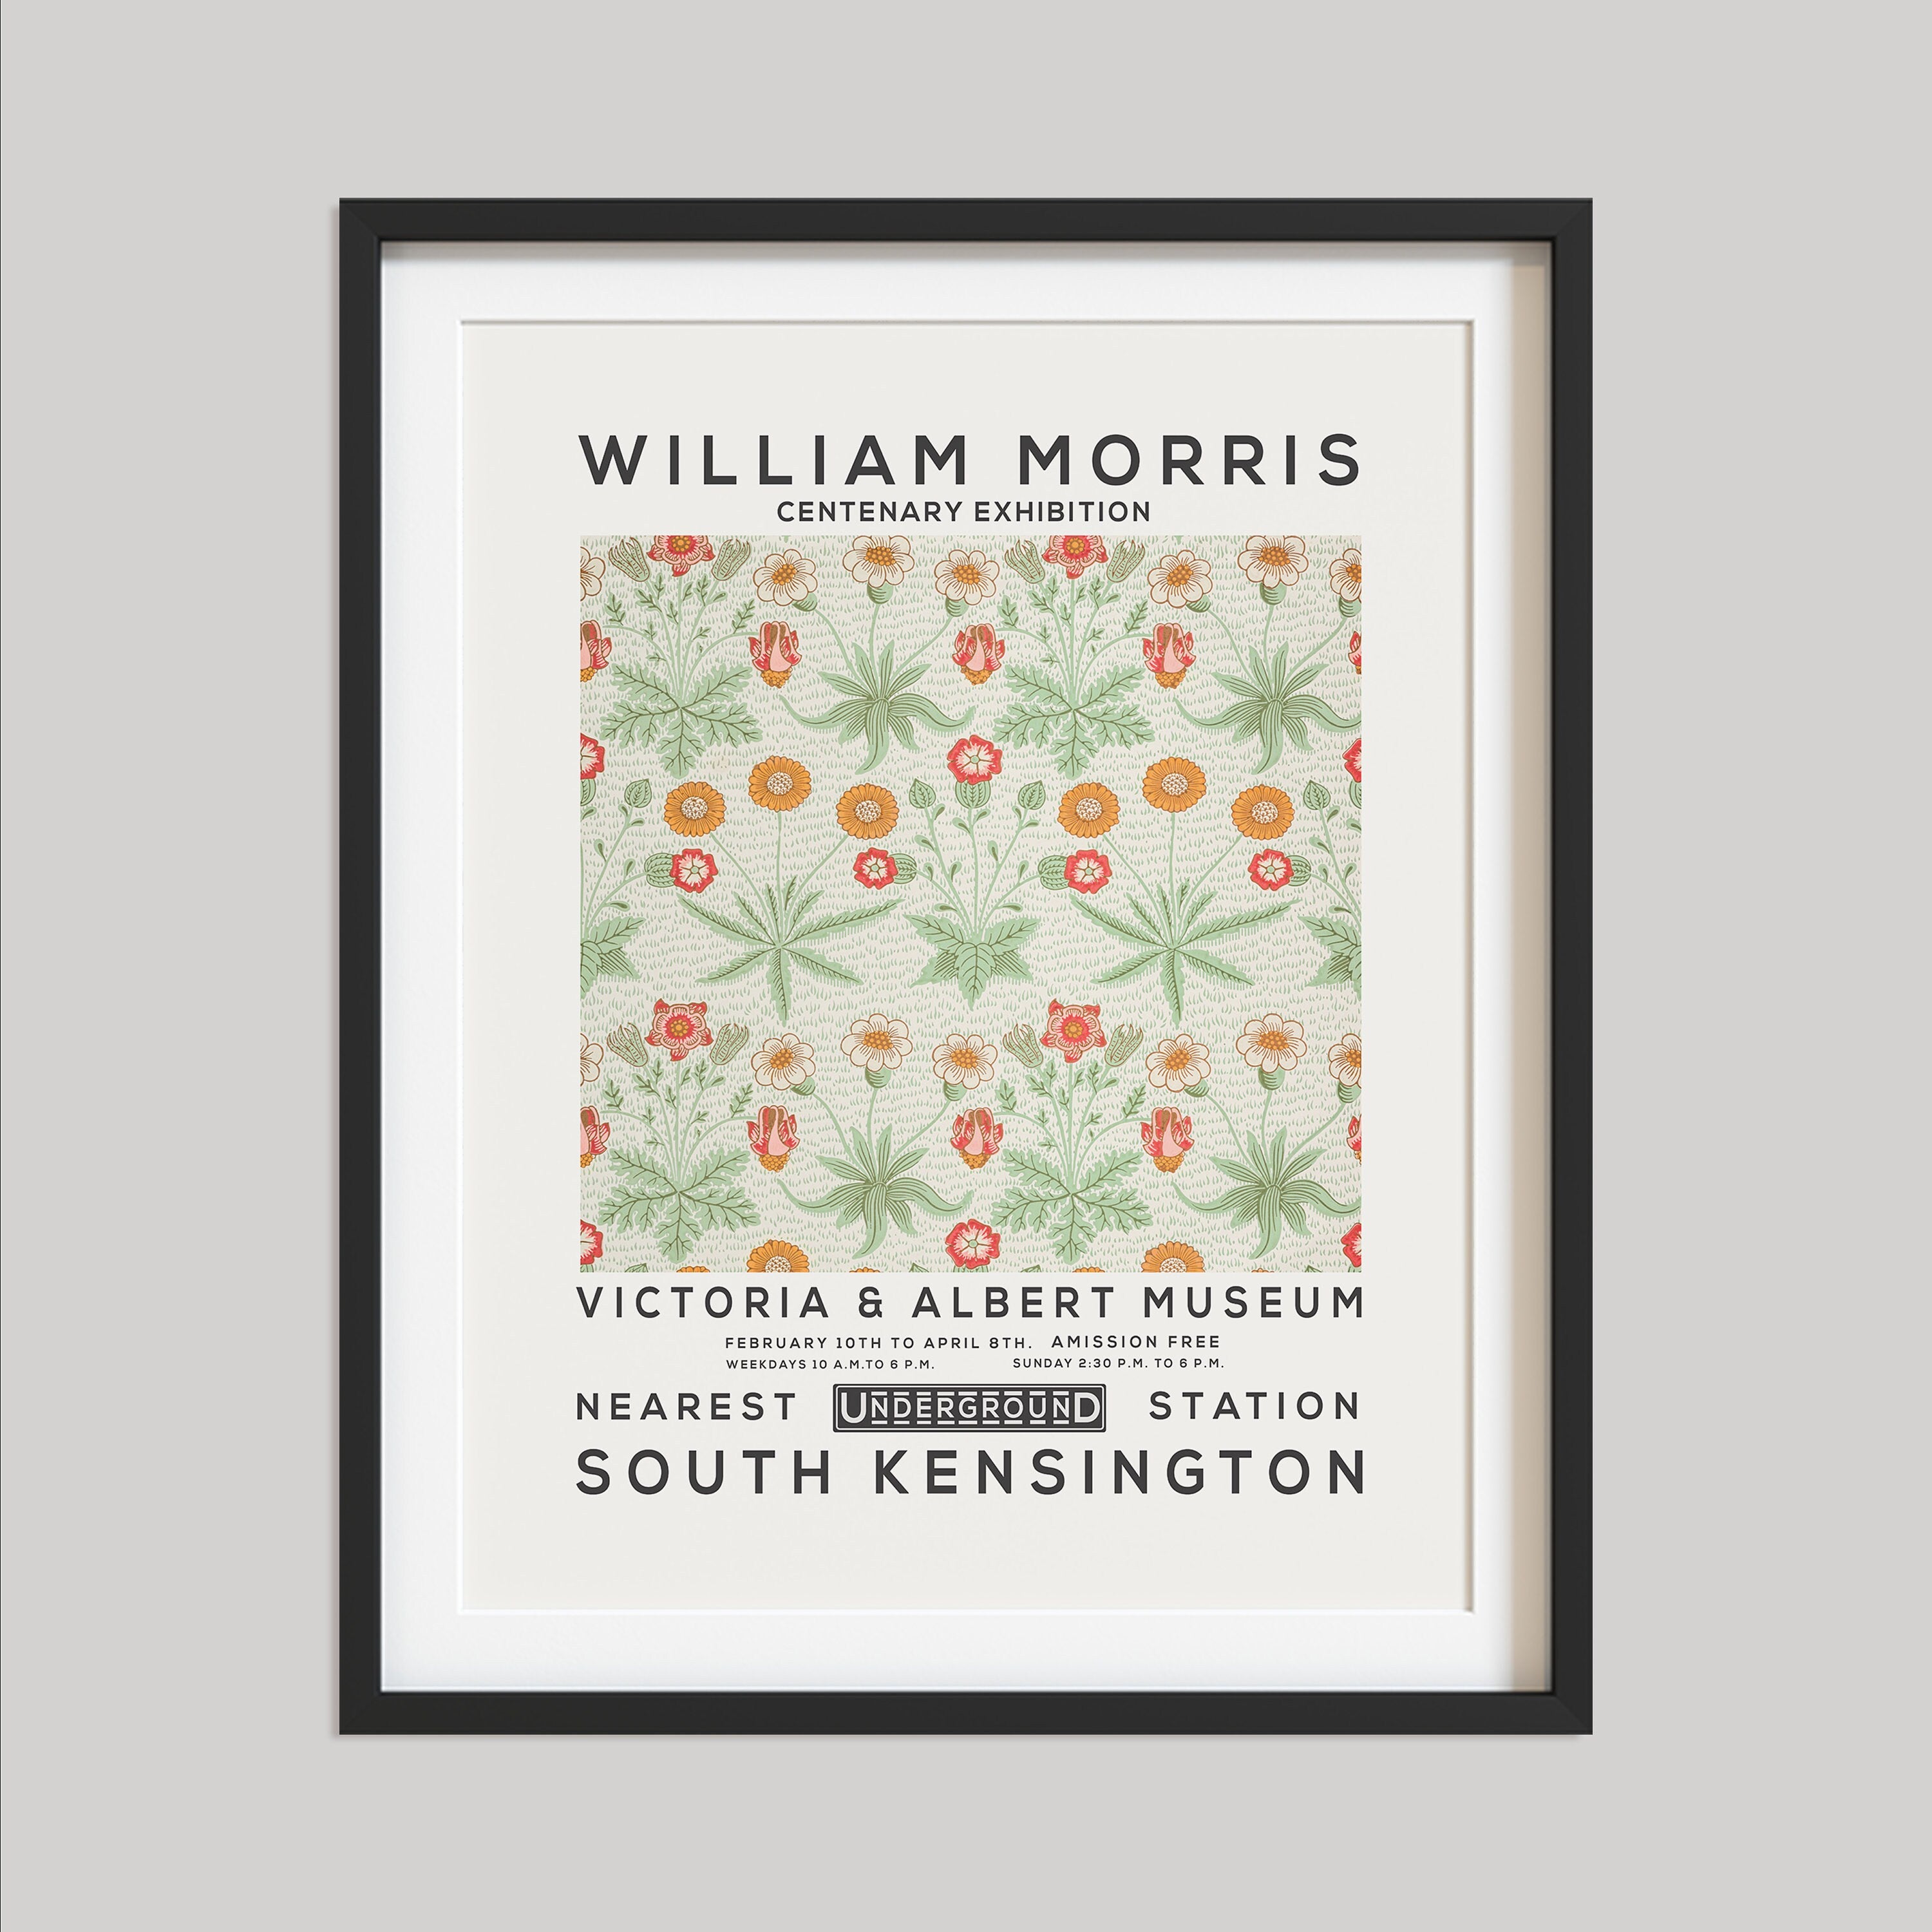 William Morris Print, Vintage Wall Decor, Exhibition Poster, Floral Wall Art, Flower Print, Home Decor, Daisy Pattern